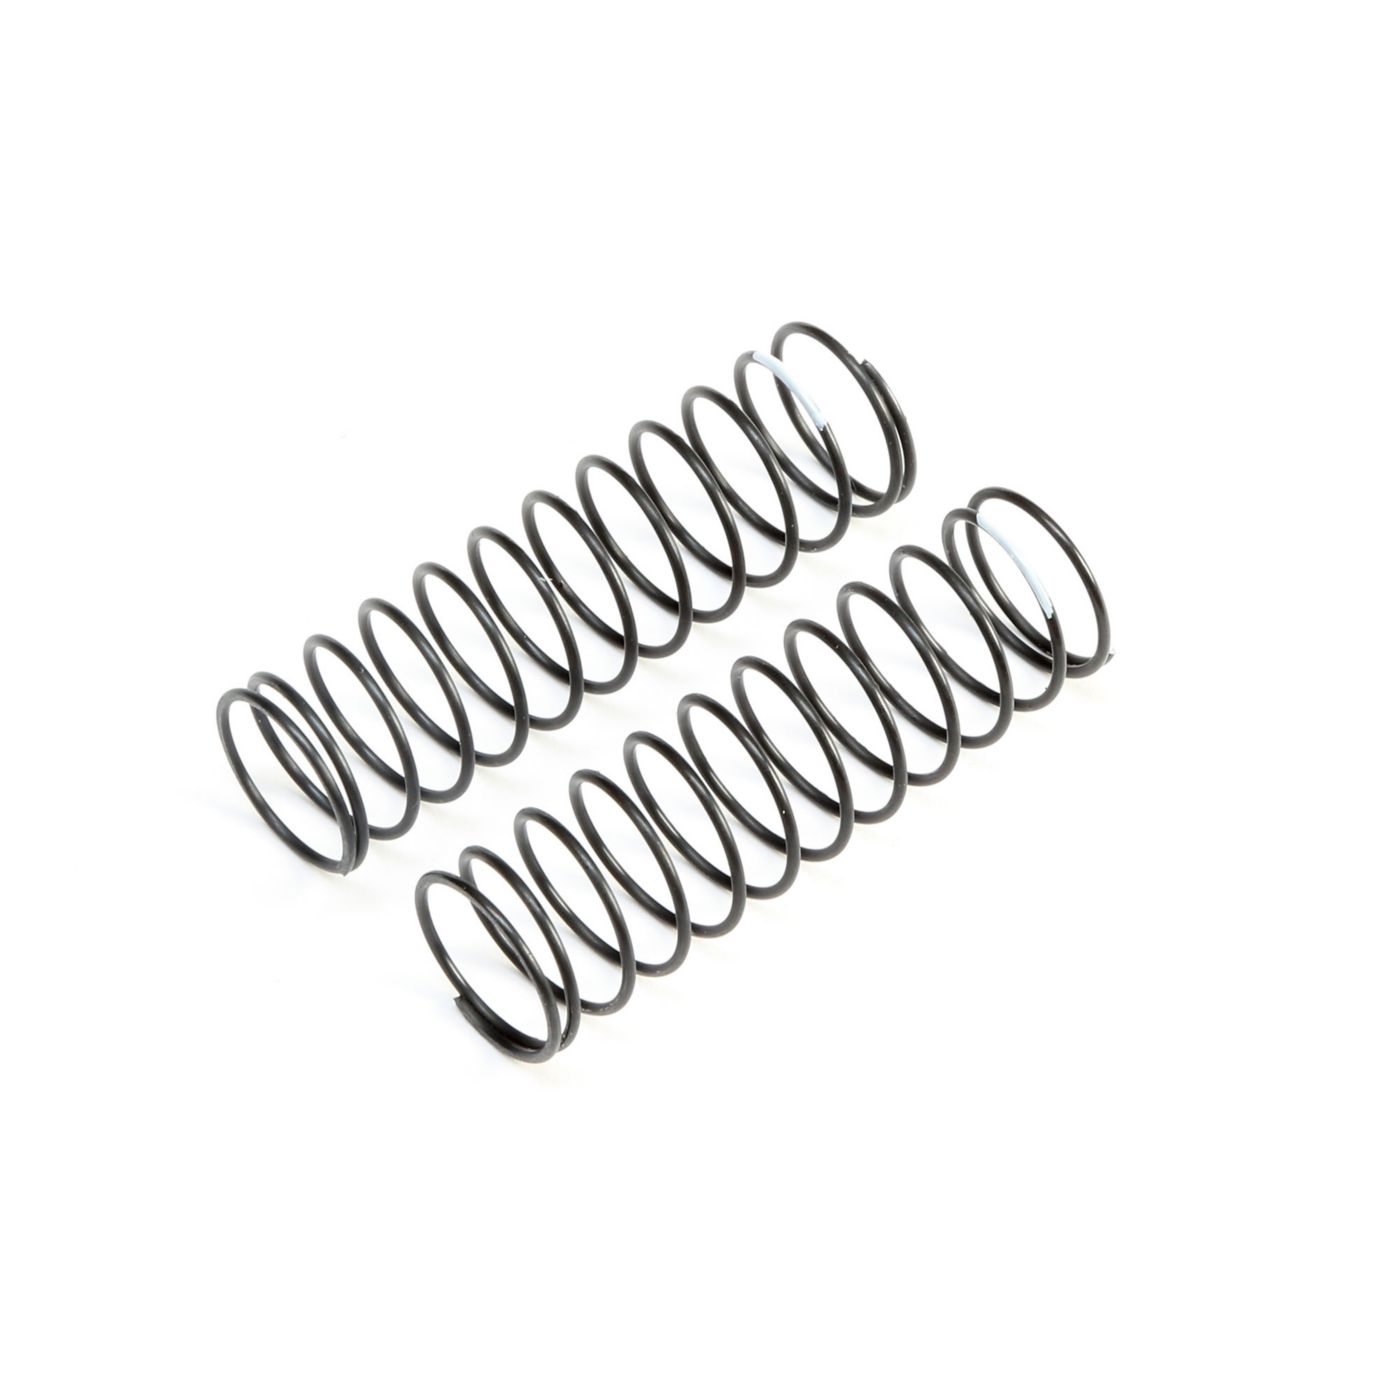 TLR White Rear Springs Low Frequency 12mm (2) TLR233056